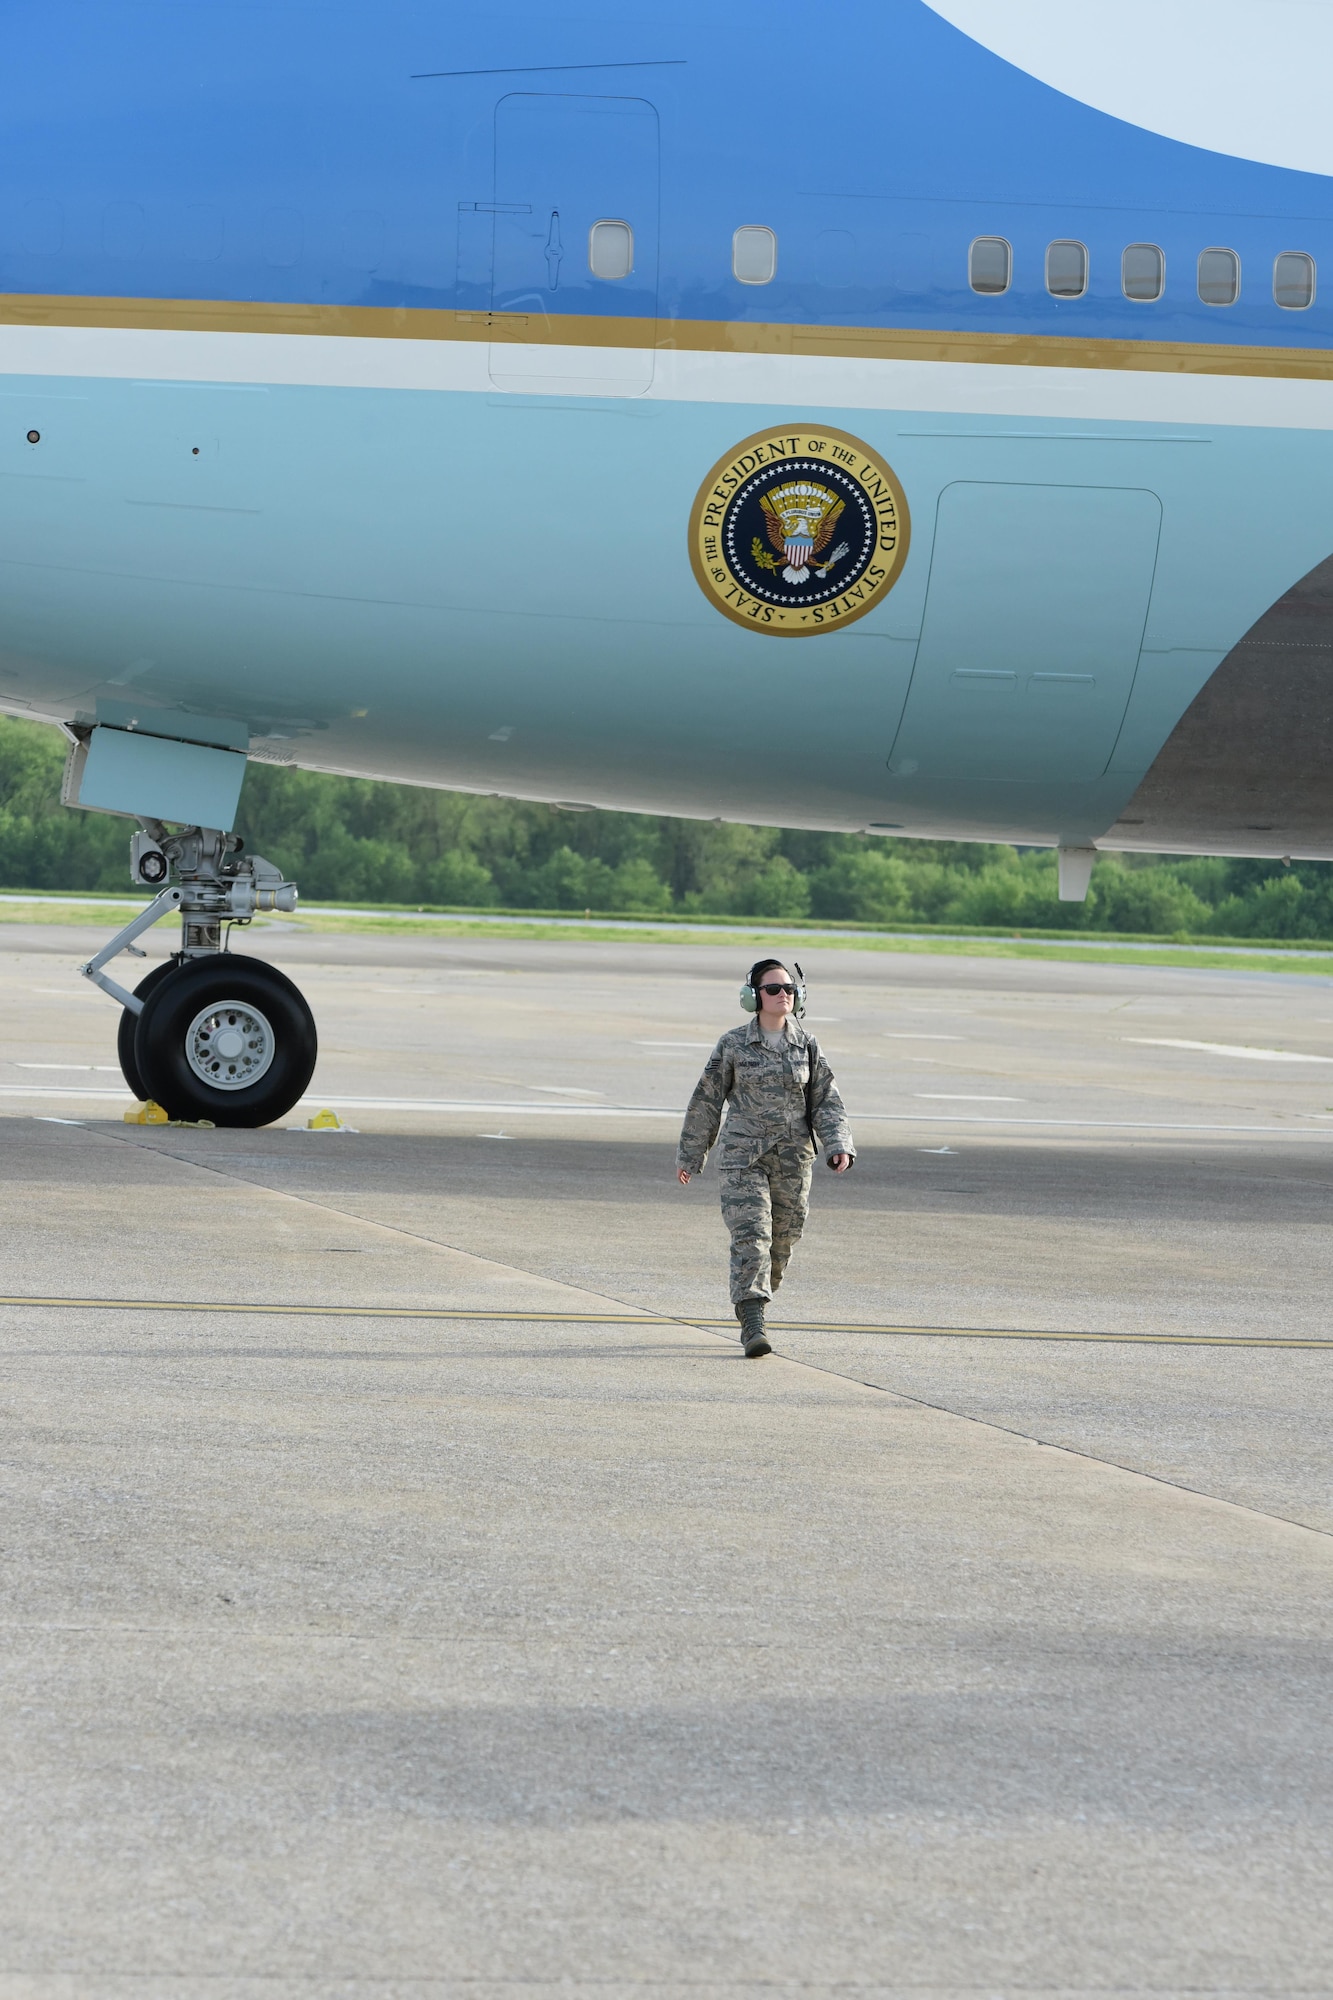 Staff Sgt. Katelyn Zimmerman, 193rd Special Operations Wing instruments and flight controls system specialist, walks away from Air Force One after chalking the front wheels once it landed at the 193rd SOW, Middletown, Pennsylvania, April 29, 2017. President Donald J. Trump and Vice President Mike Pence; whom landed earlier, were on their way to the Harrisburg Farm Show Complex for President Trump’s 100th day rally. (U.S. Air National Guard Photo by Master Sgt. Culeen Shaffer/Released)